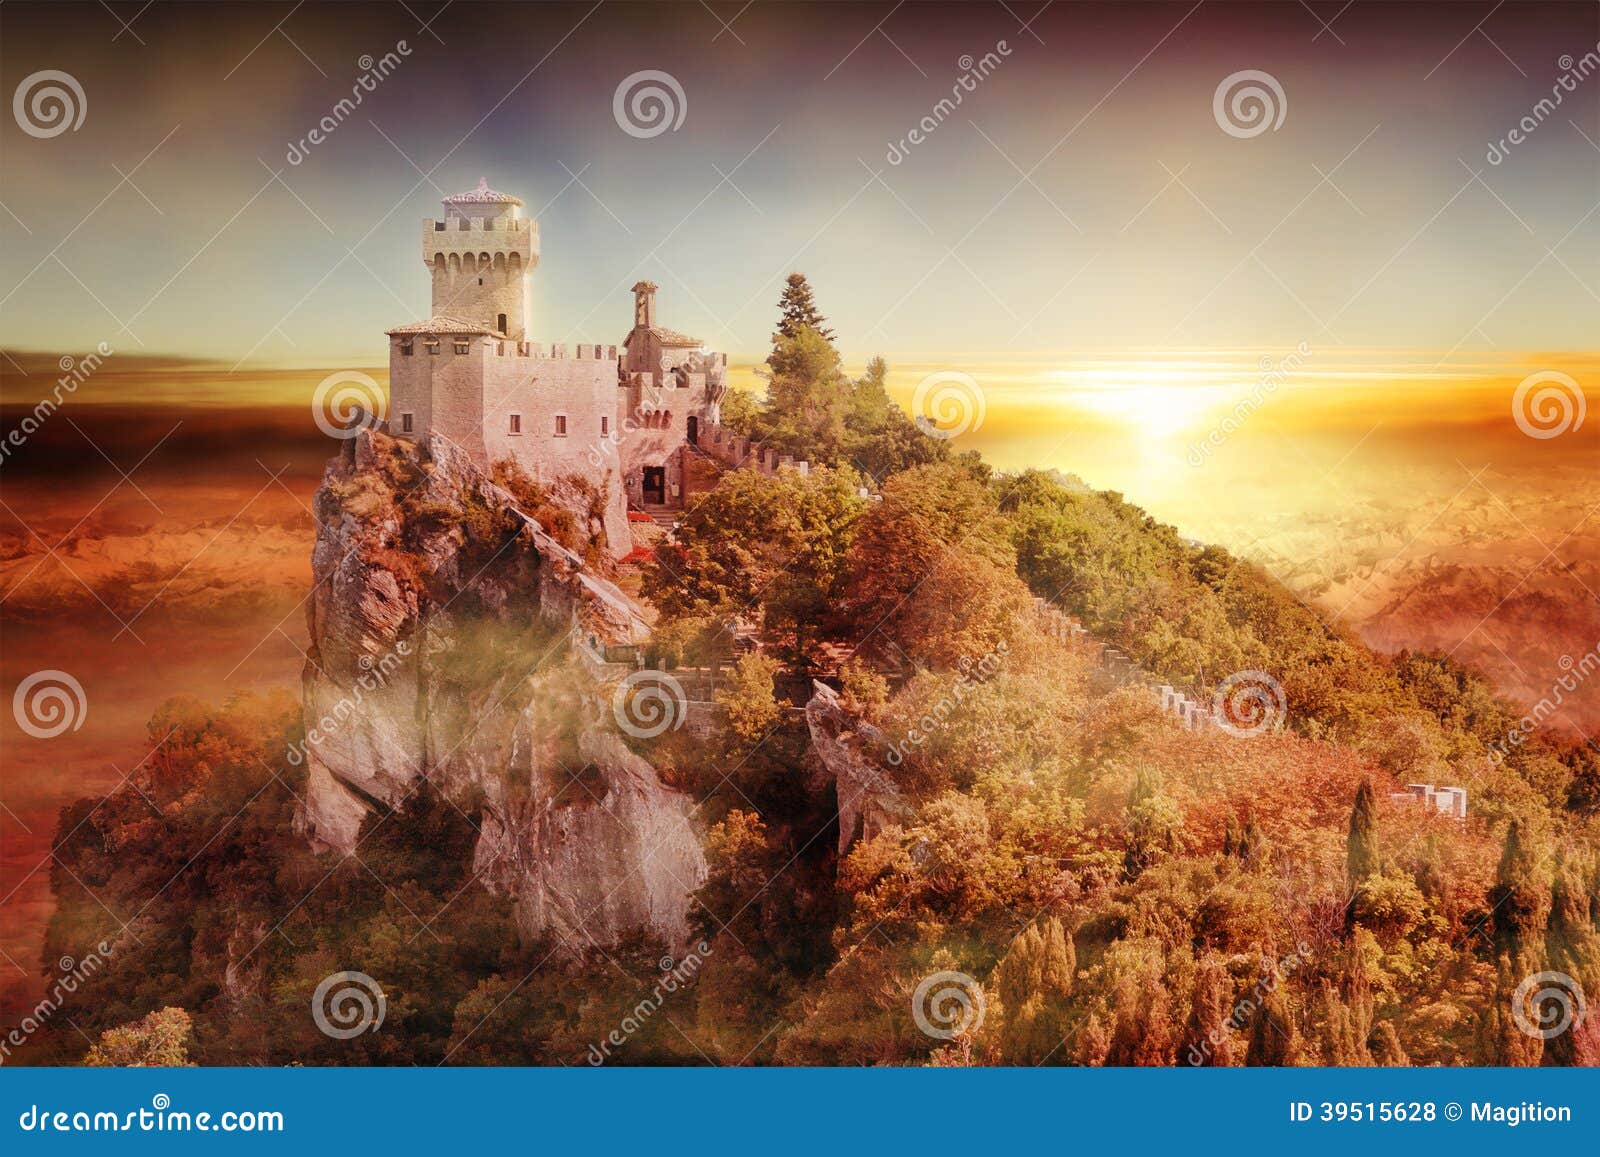 artistic view of san marino tower: the cesta or fratta at sunset